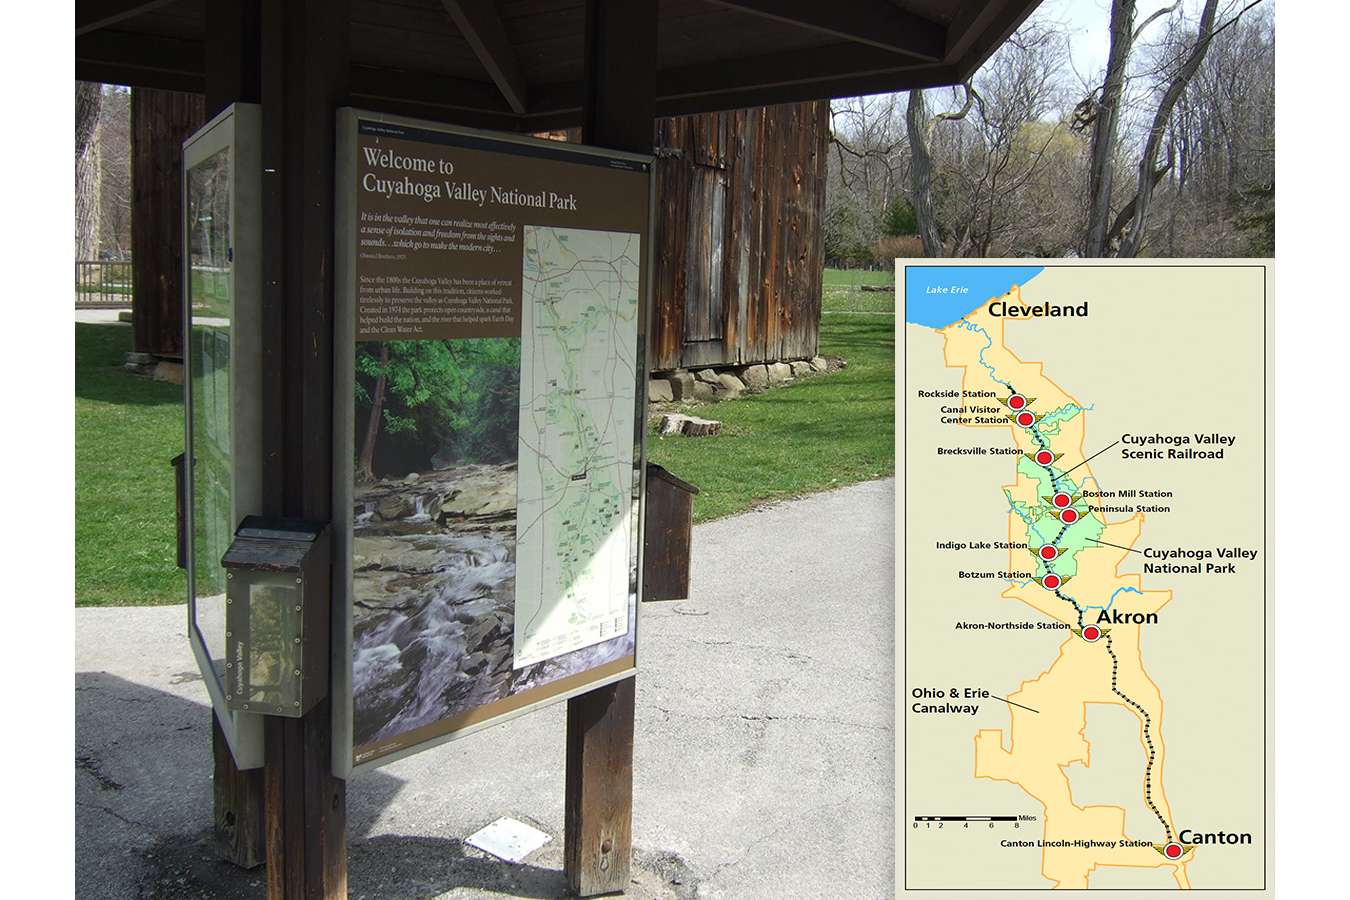 CUVANPS1 : Waysides for the Cuyahoga Valley National Park include new logos, maps and partnership branding 